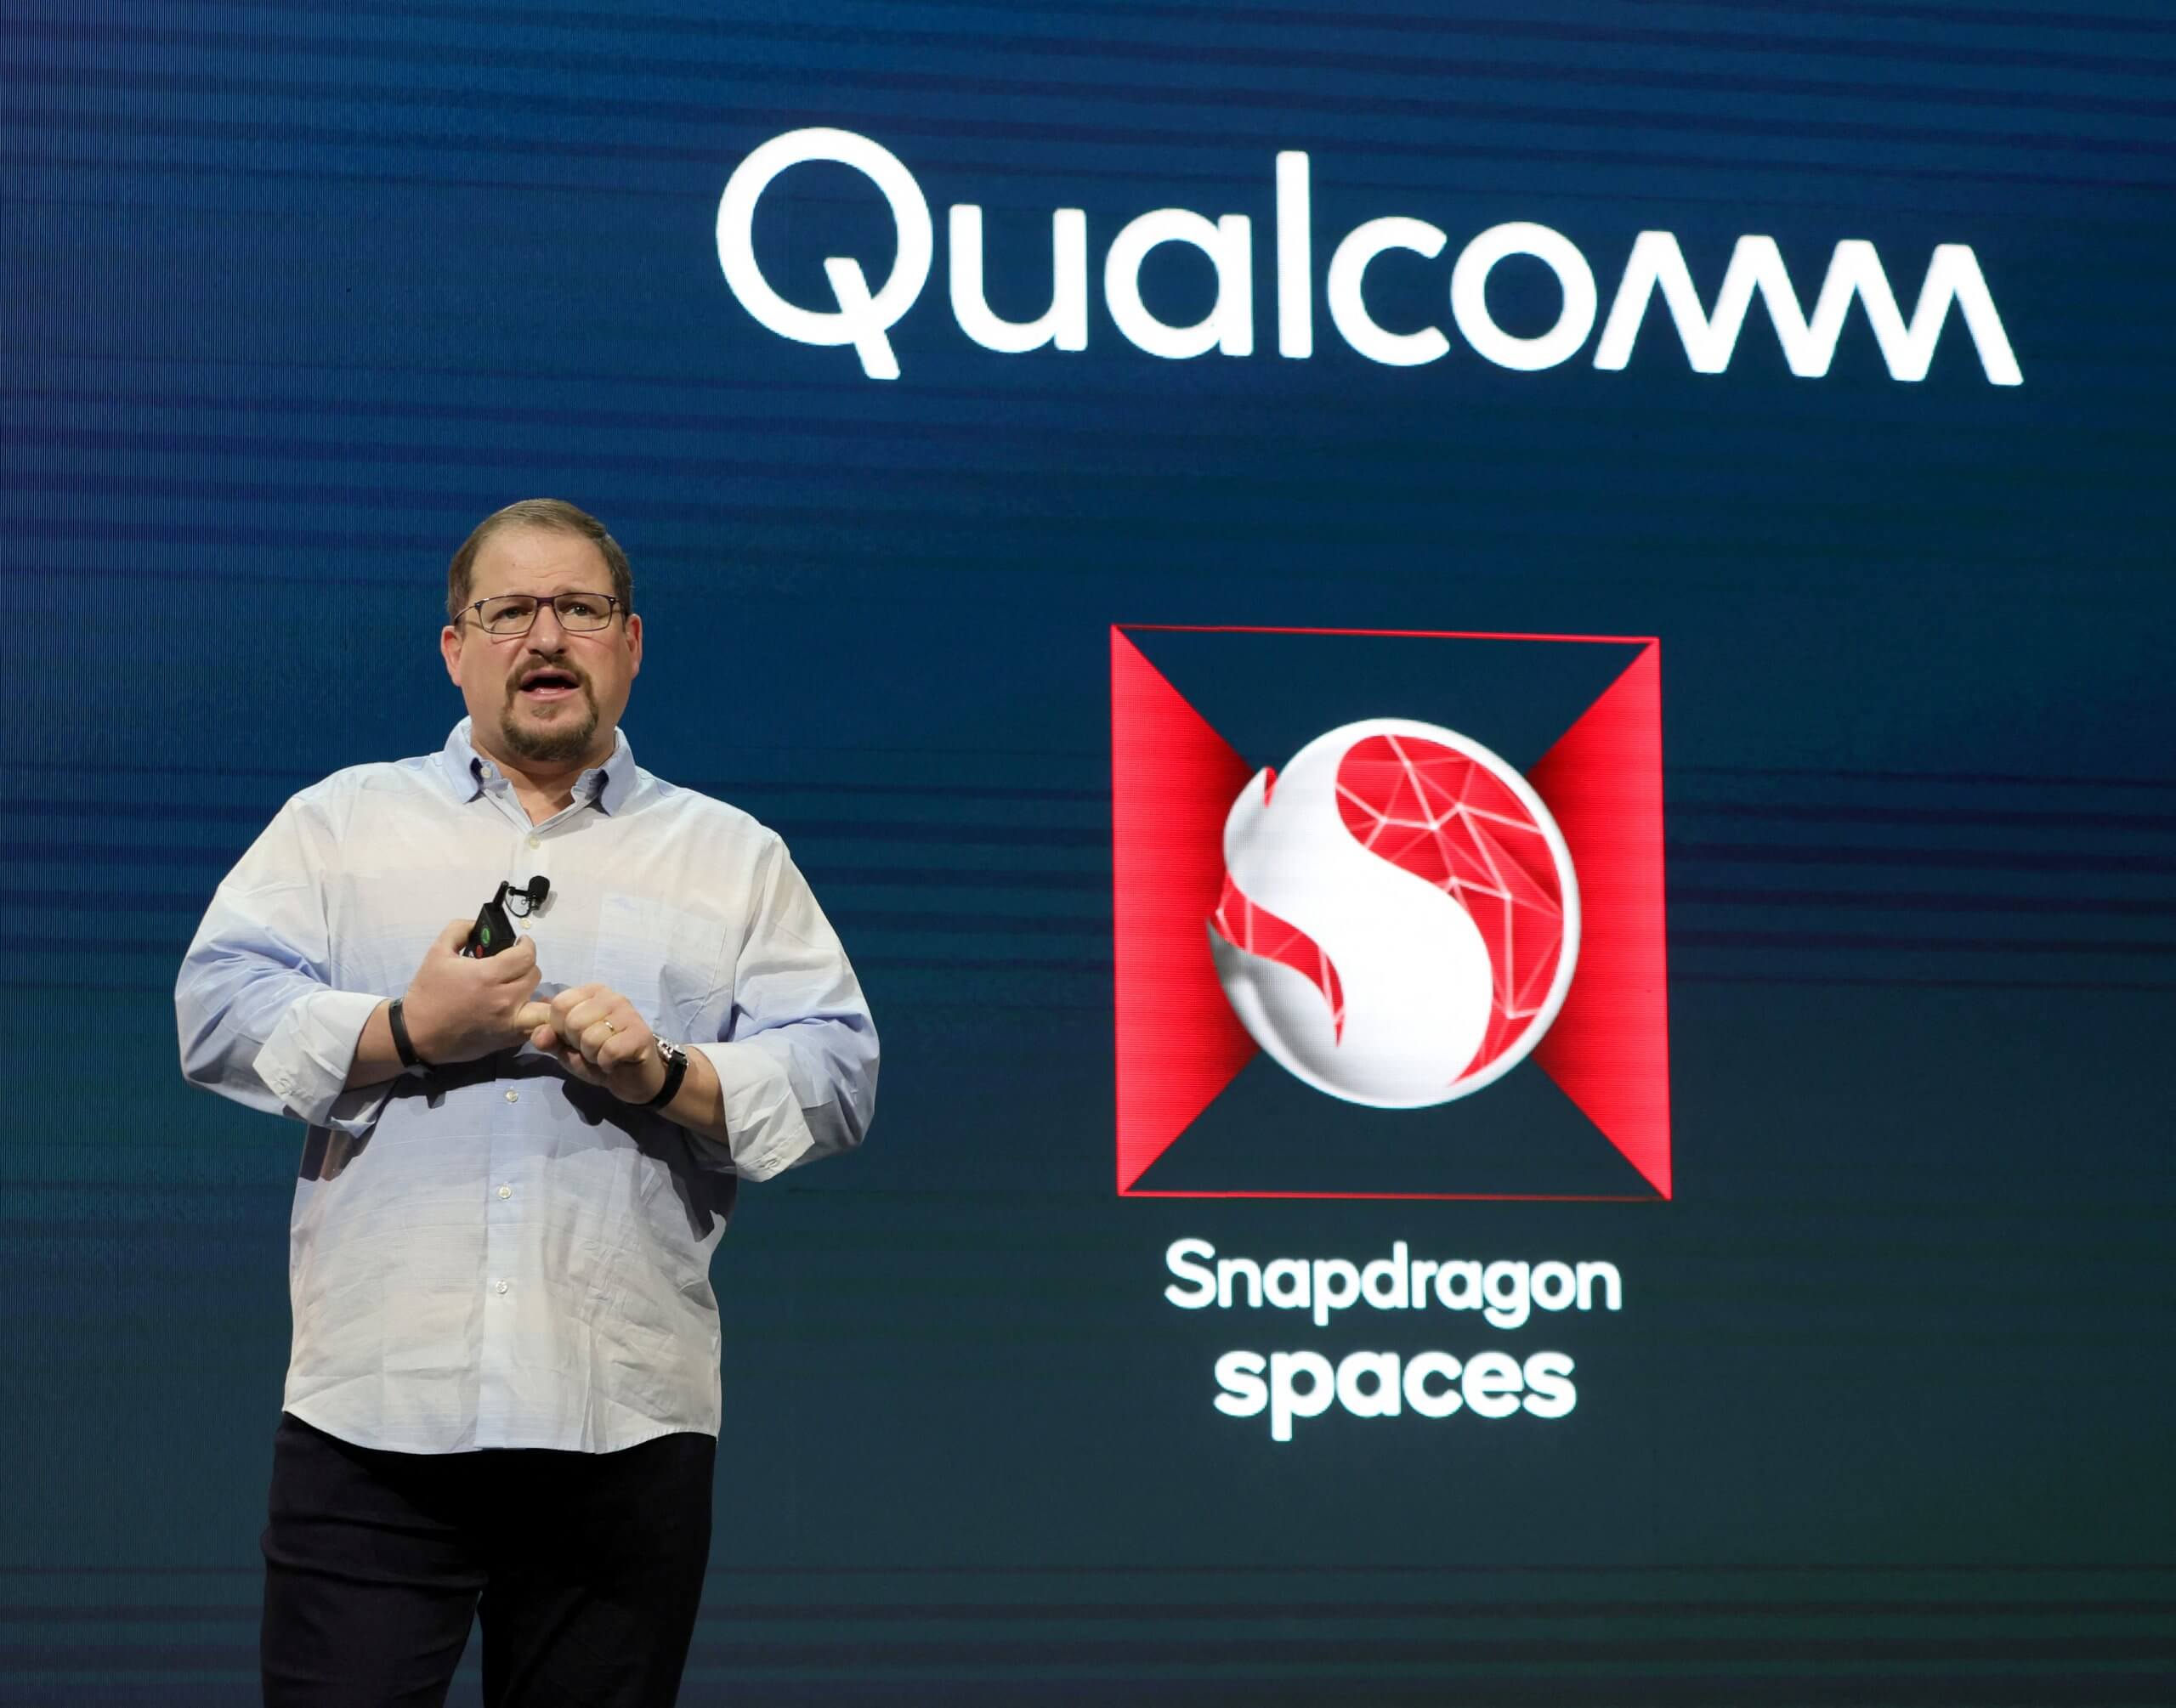 Qualcomm joins the Metaverse race with six new labs in Europe